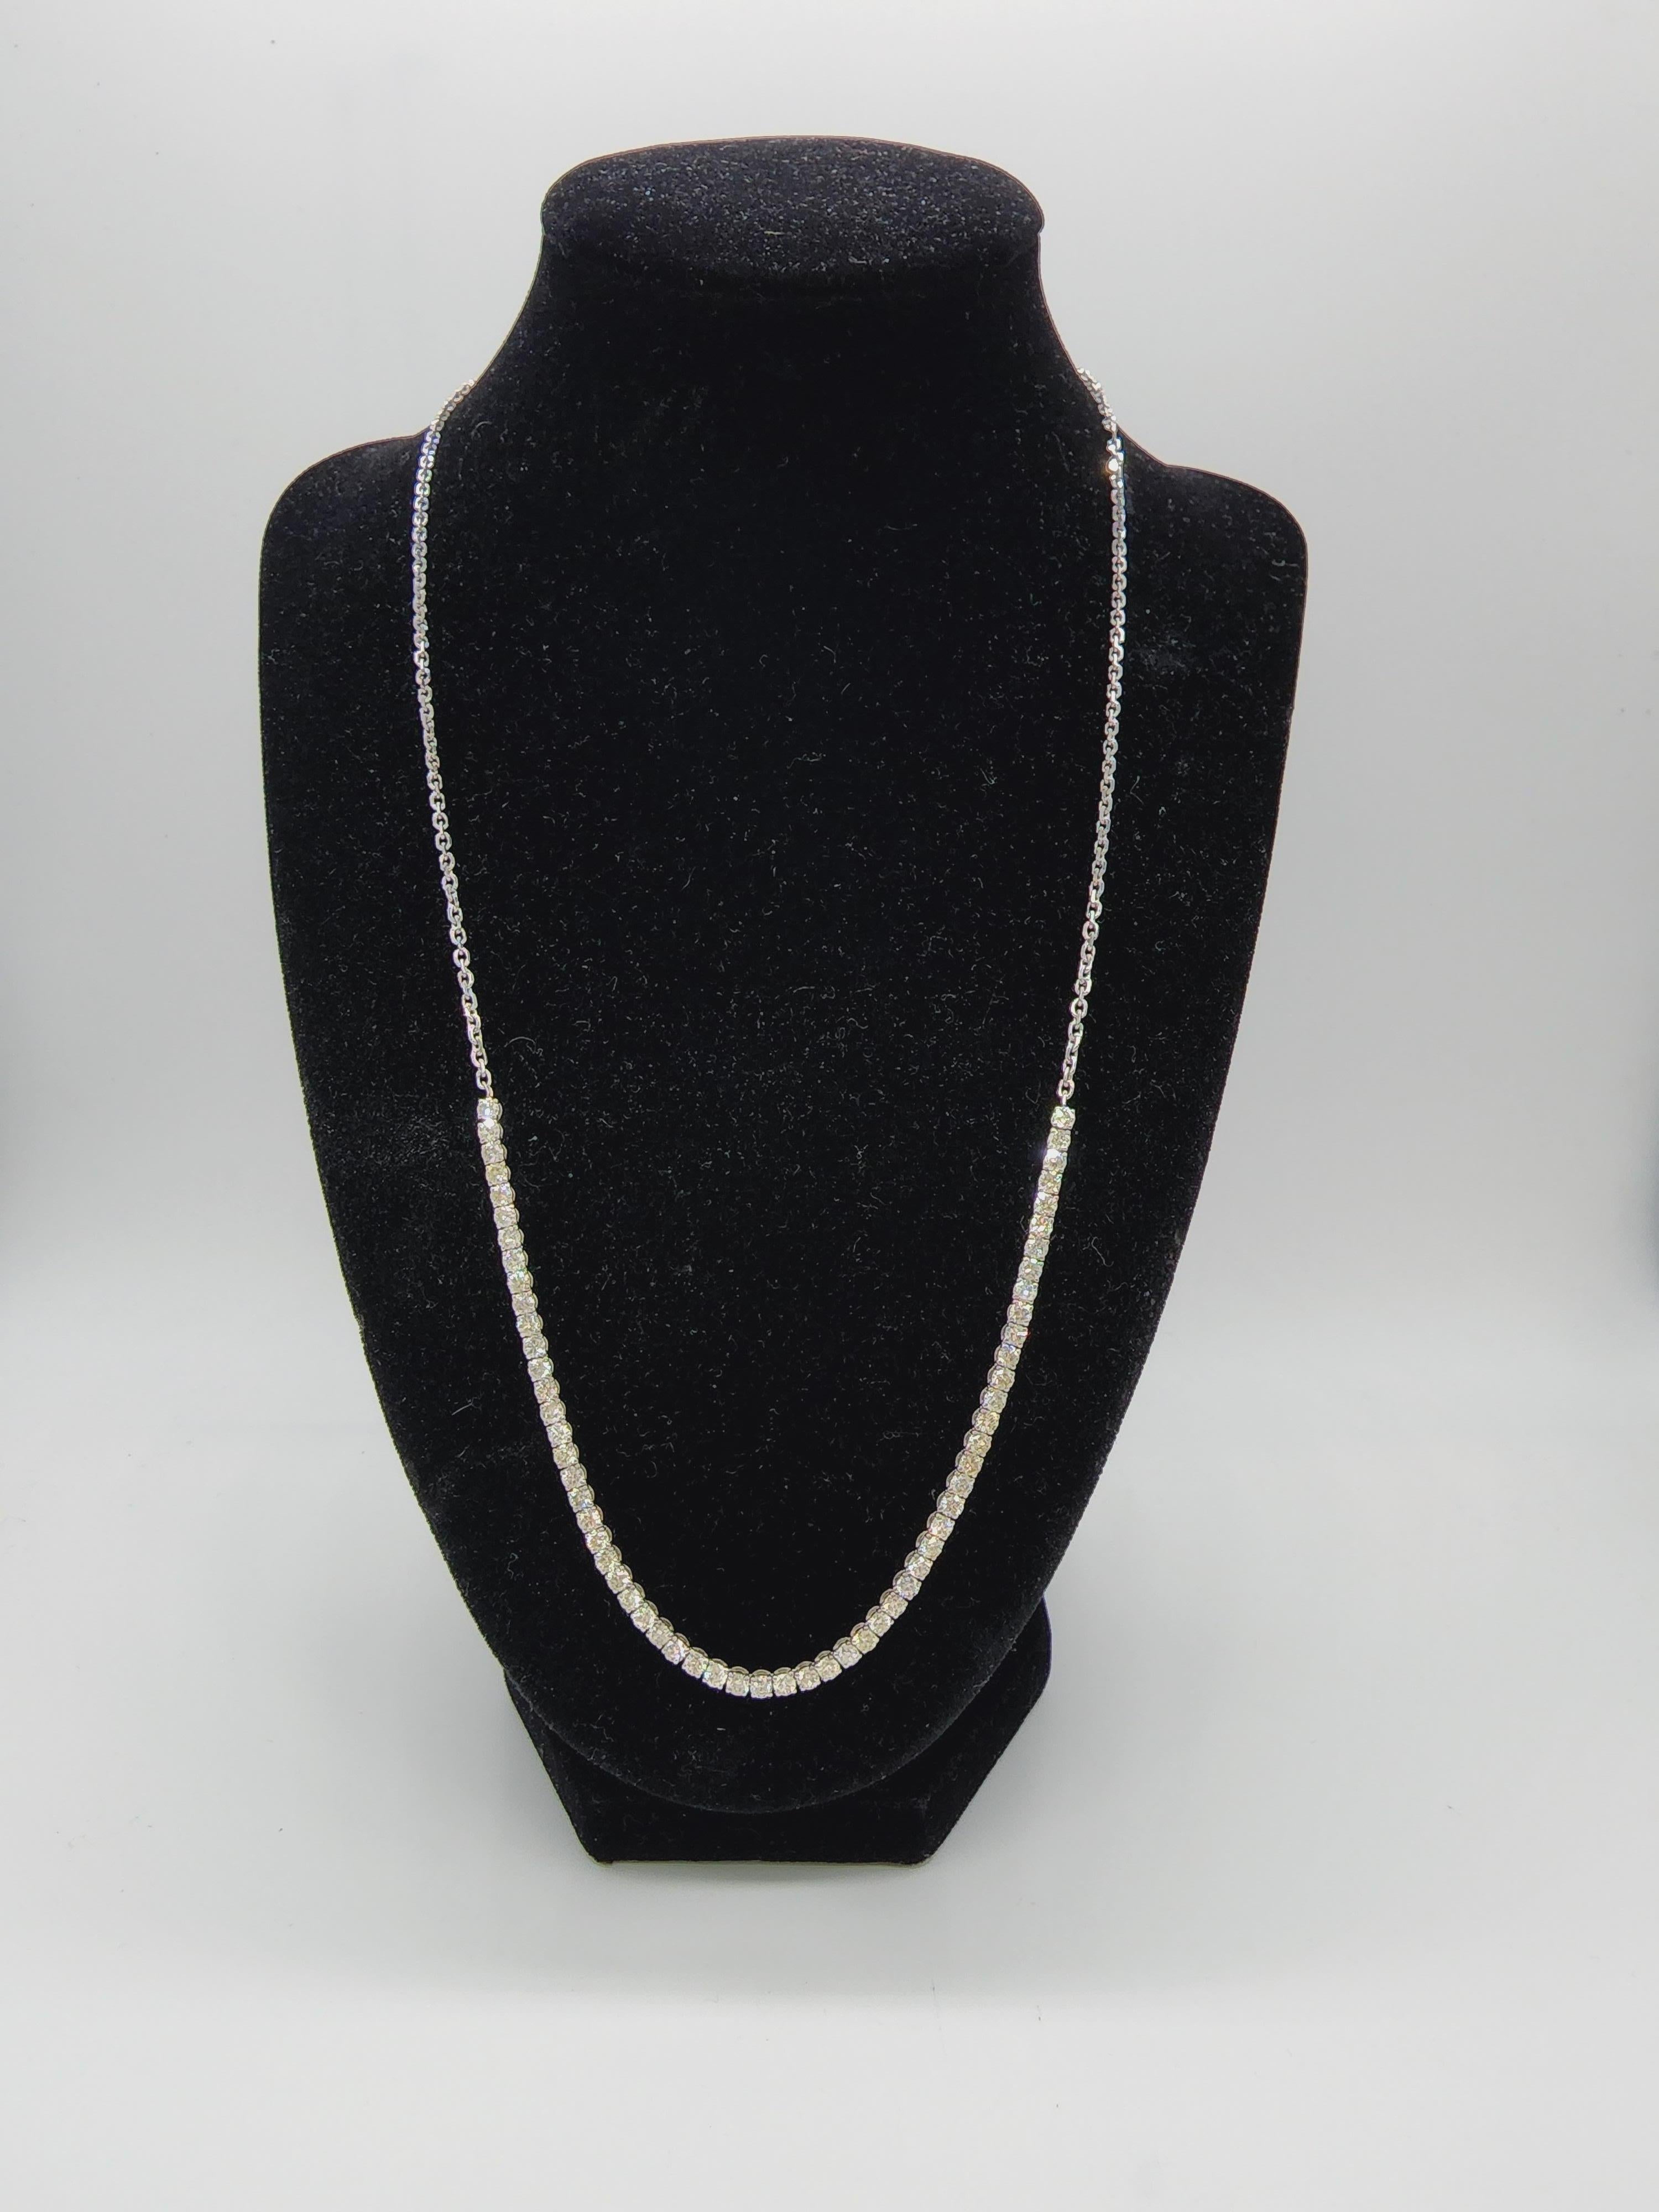 Brilliant and beautiful mini tennis necklace, natural round-brilliant cut white diamonds clean and Excellent shine.
14k white gold classic four-prong style for maximum light brilliance. 
22 inch length. Can be adjust to 20'' and 18'' with the